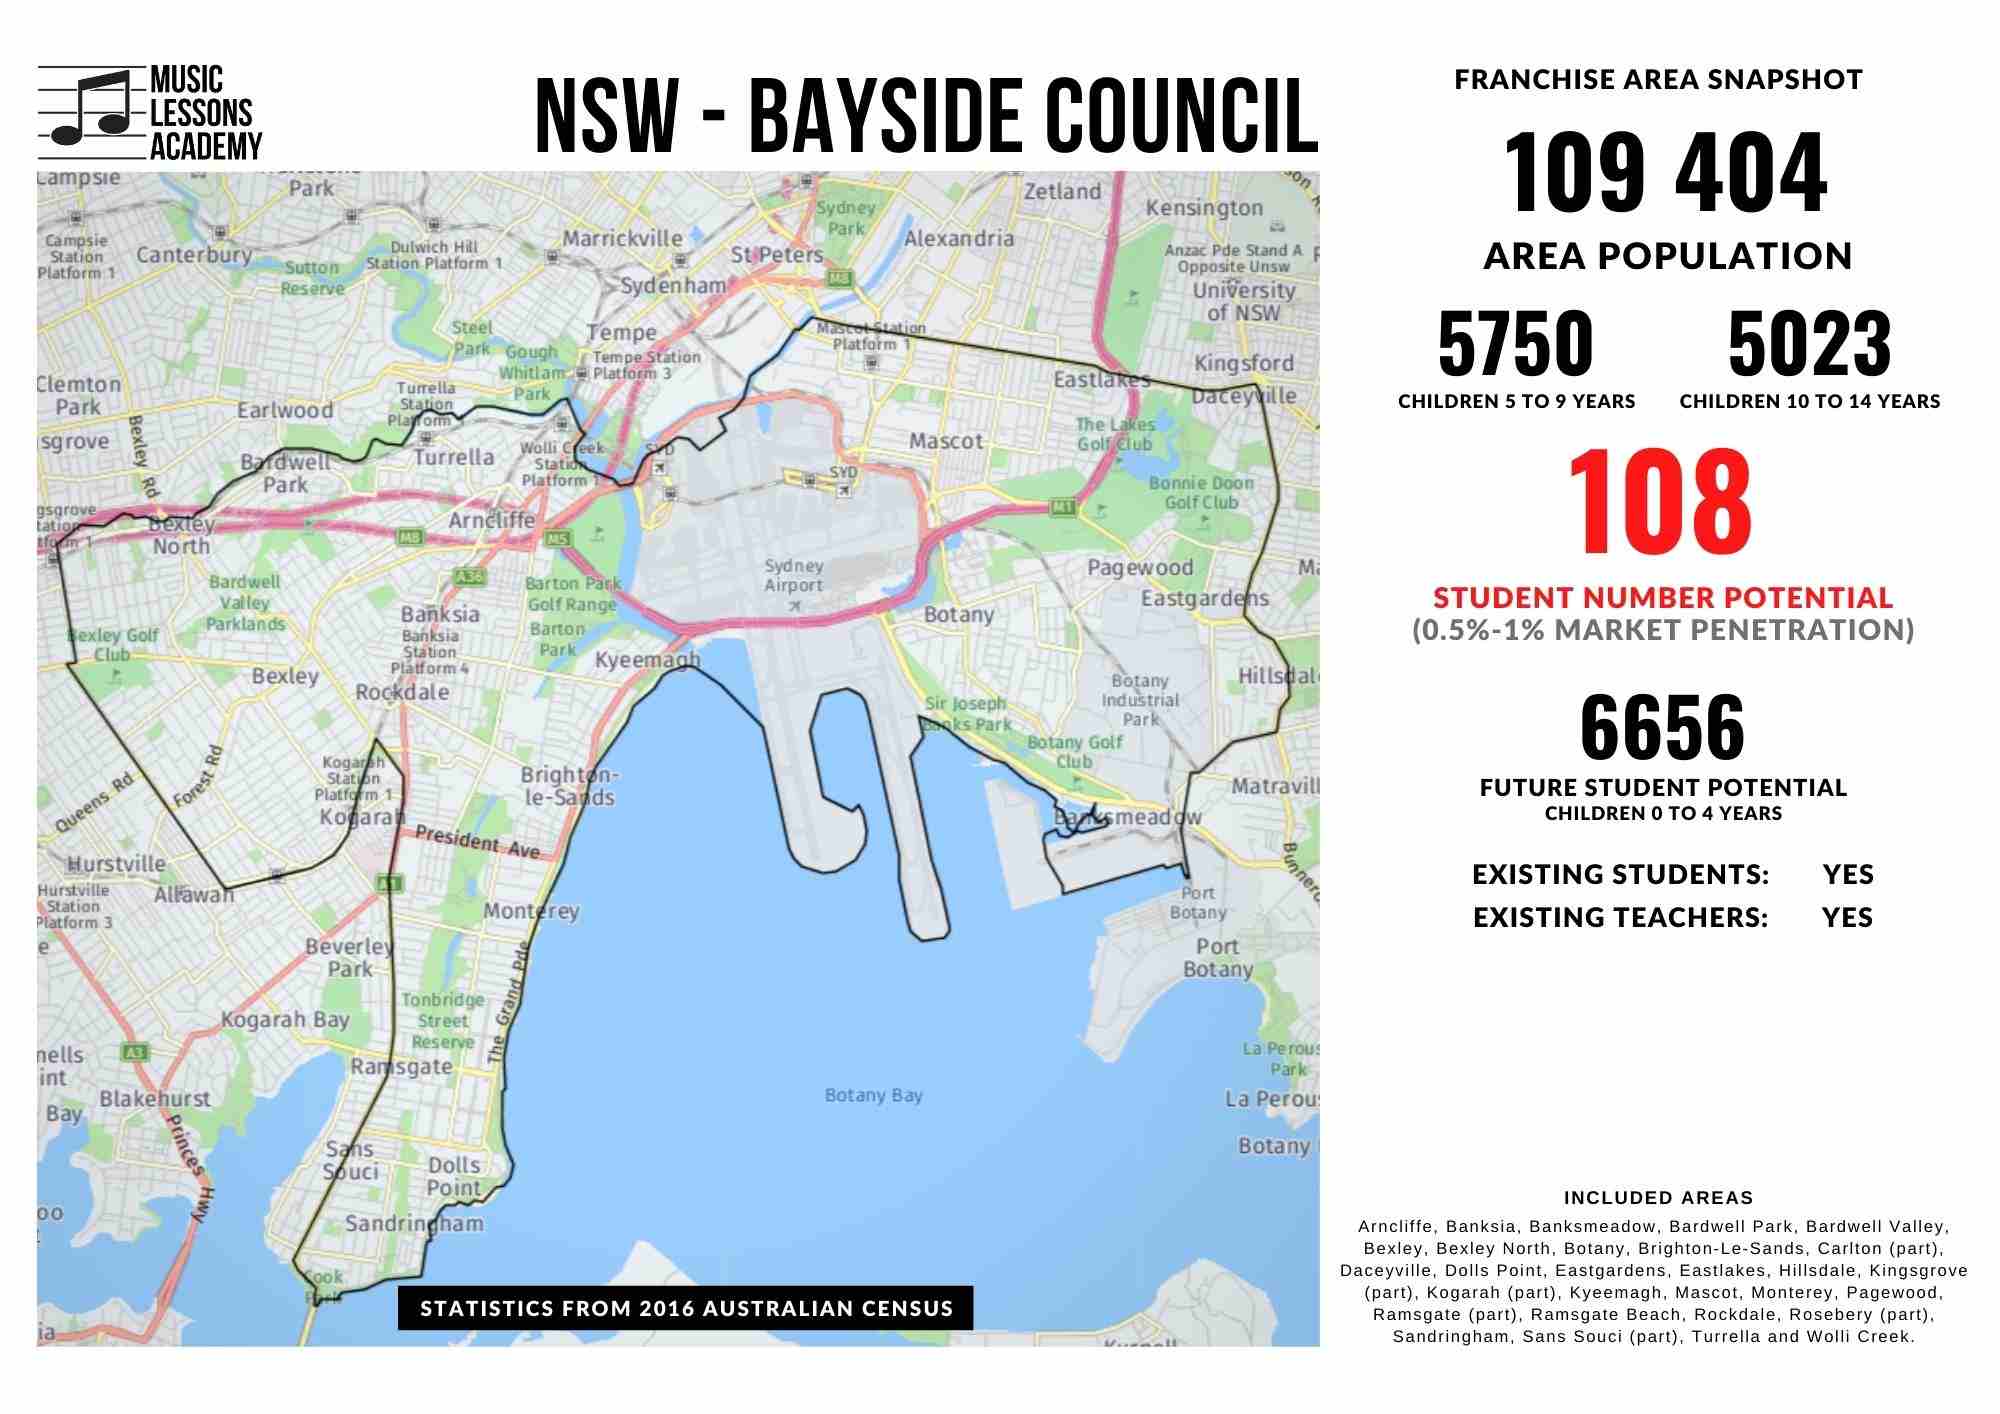 NSW Bayside Franchise for sale